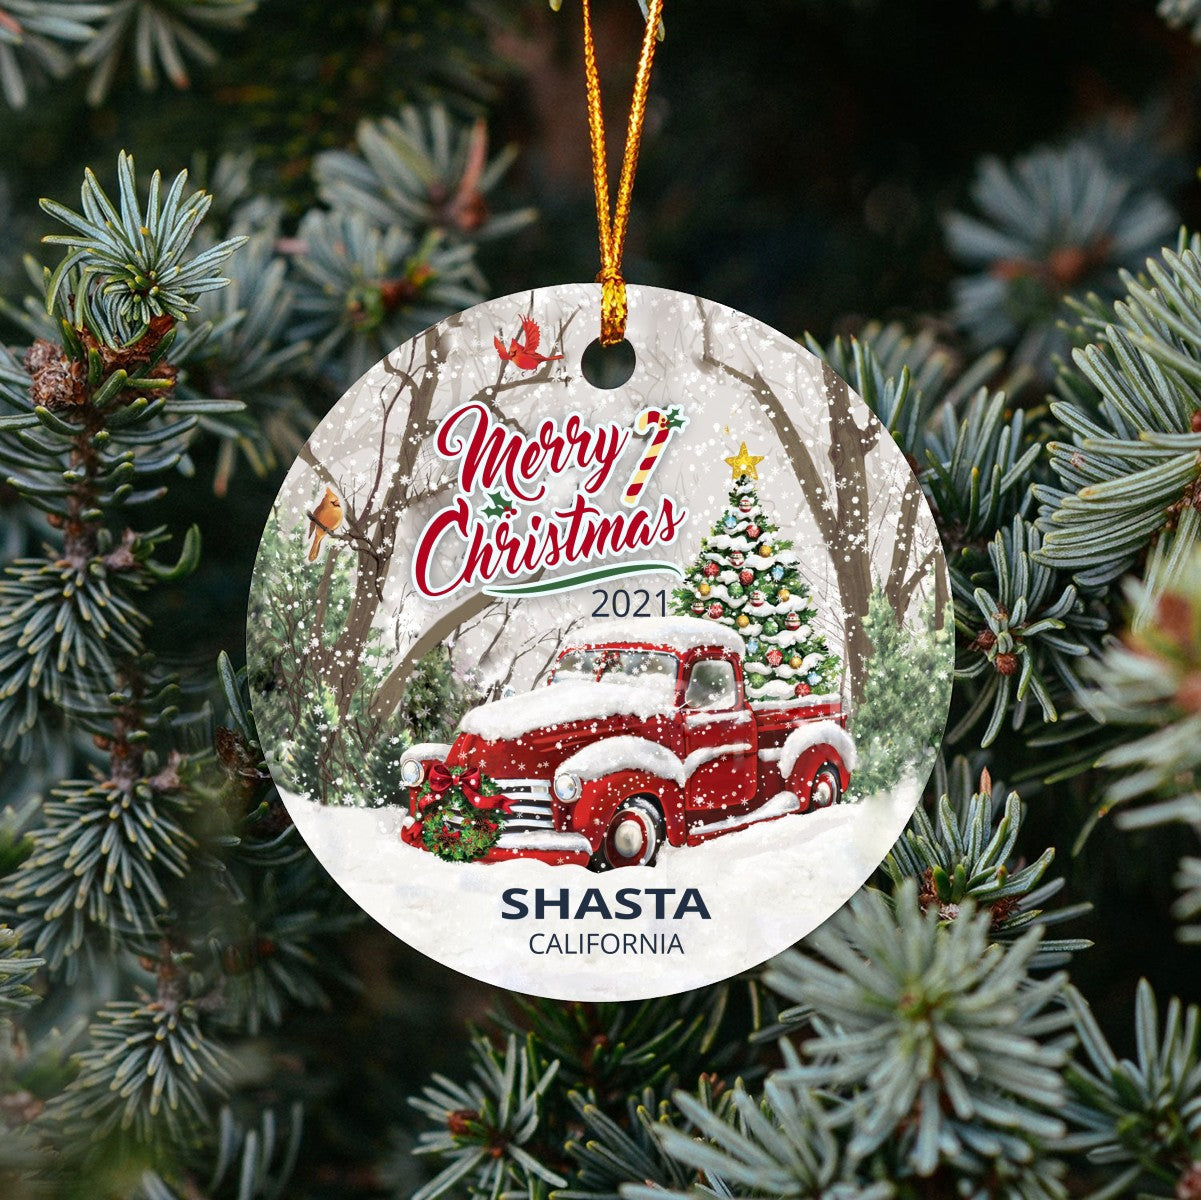 Christmas Tree Ornaments Shasta - Ornament With Name City, State Shasta California CA Ornament - Red Truck Xmas Ornaments 3'' Plastic Gift For Family, Friend And Housewarming